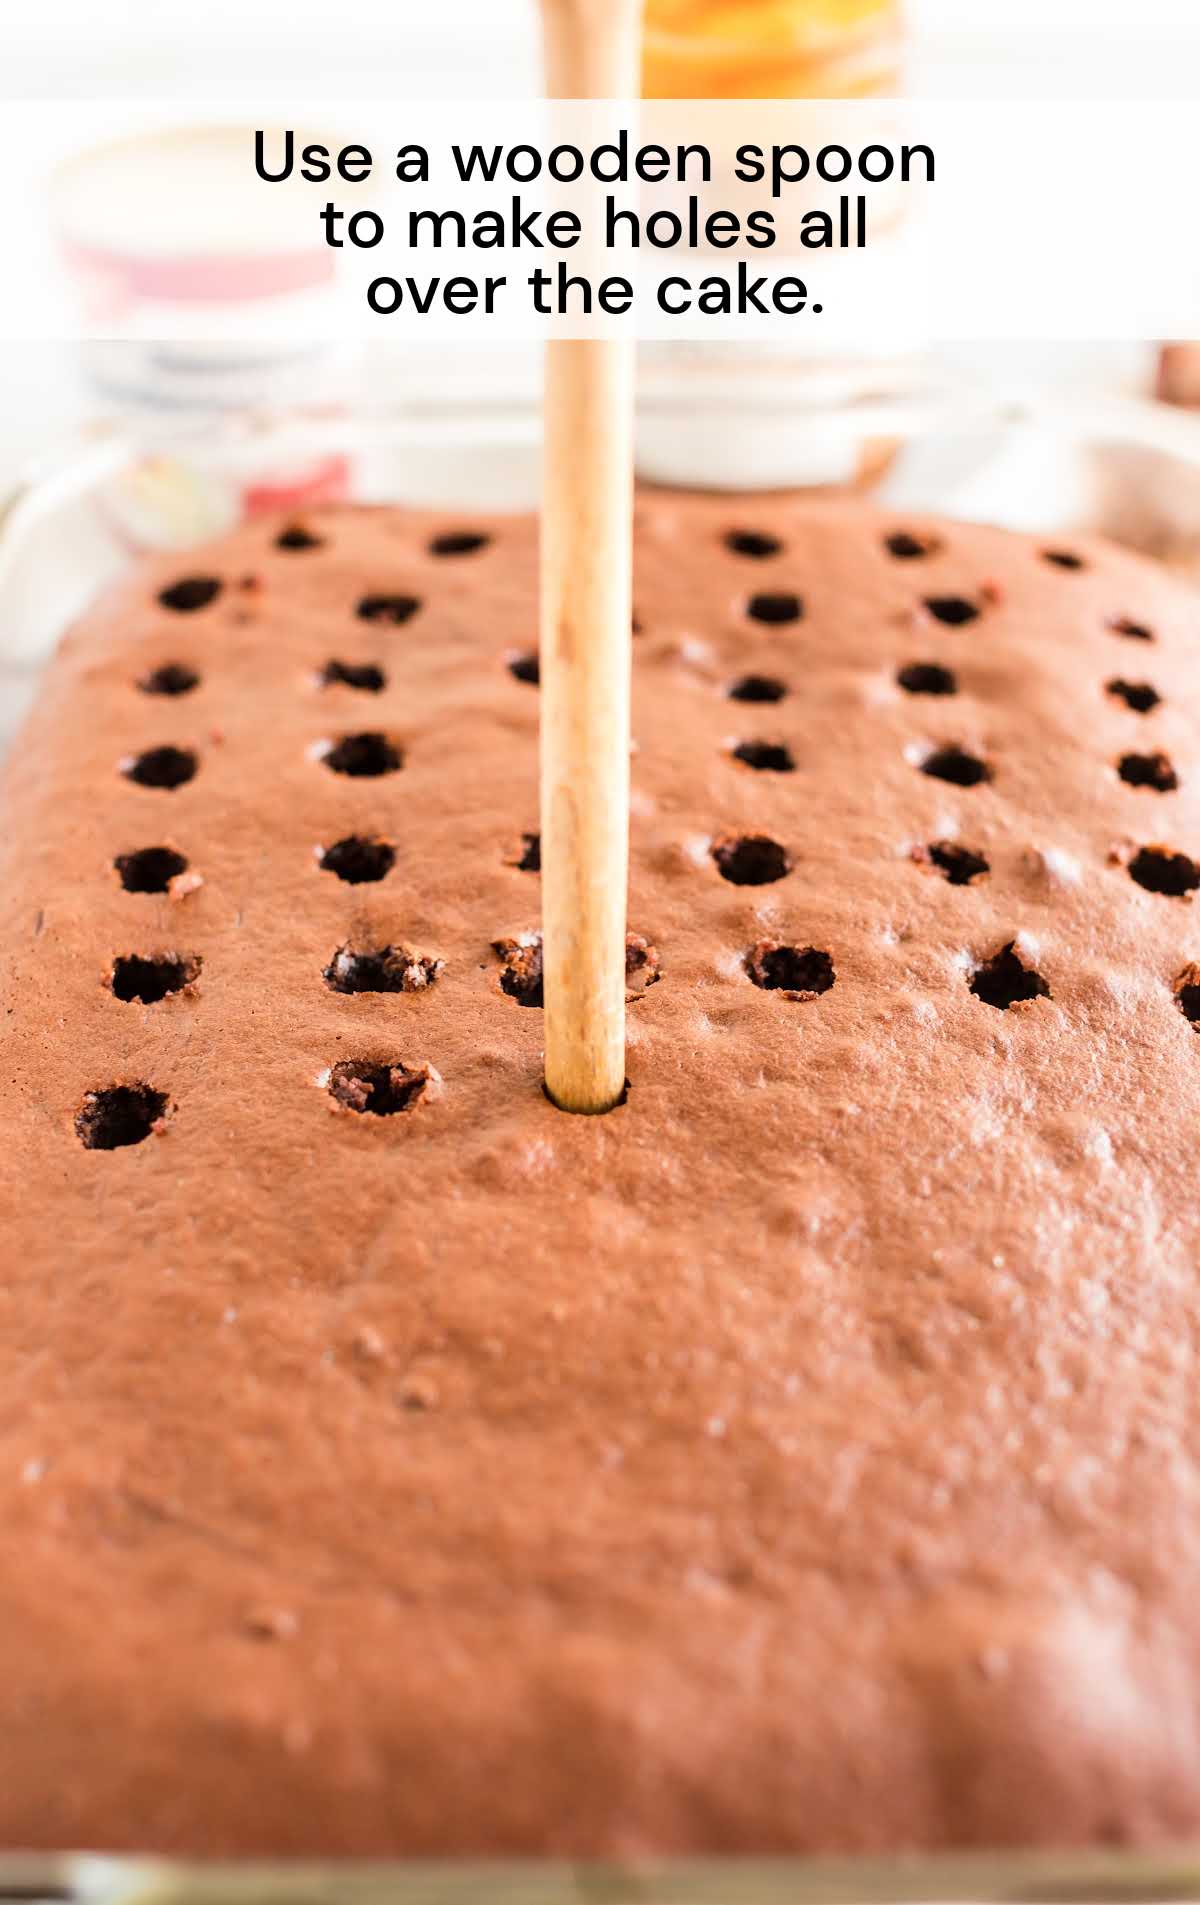 making holes on the cake using a wooden spoon